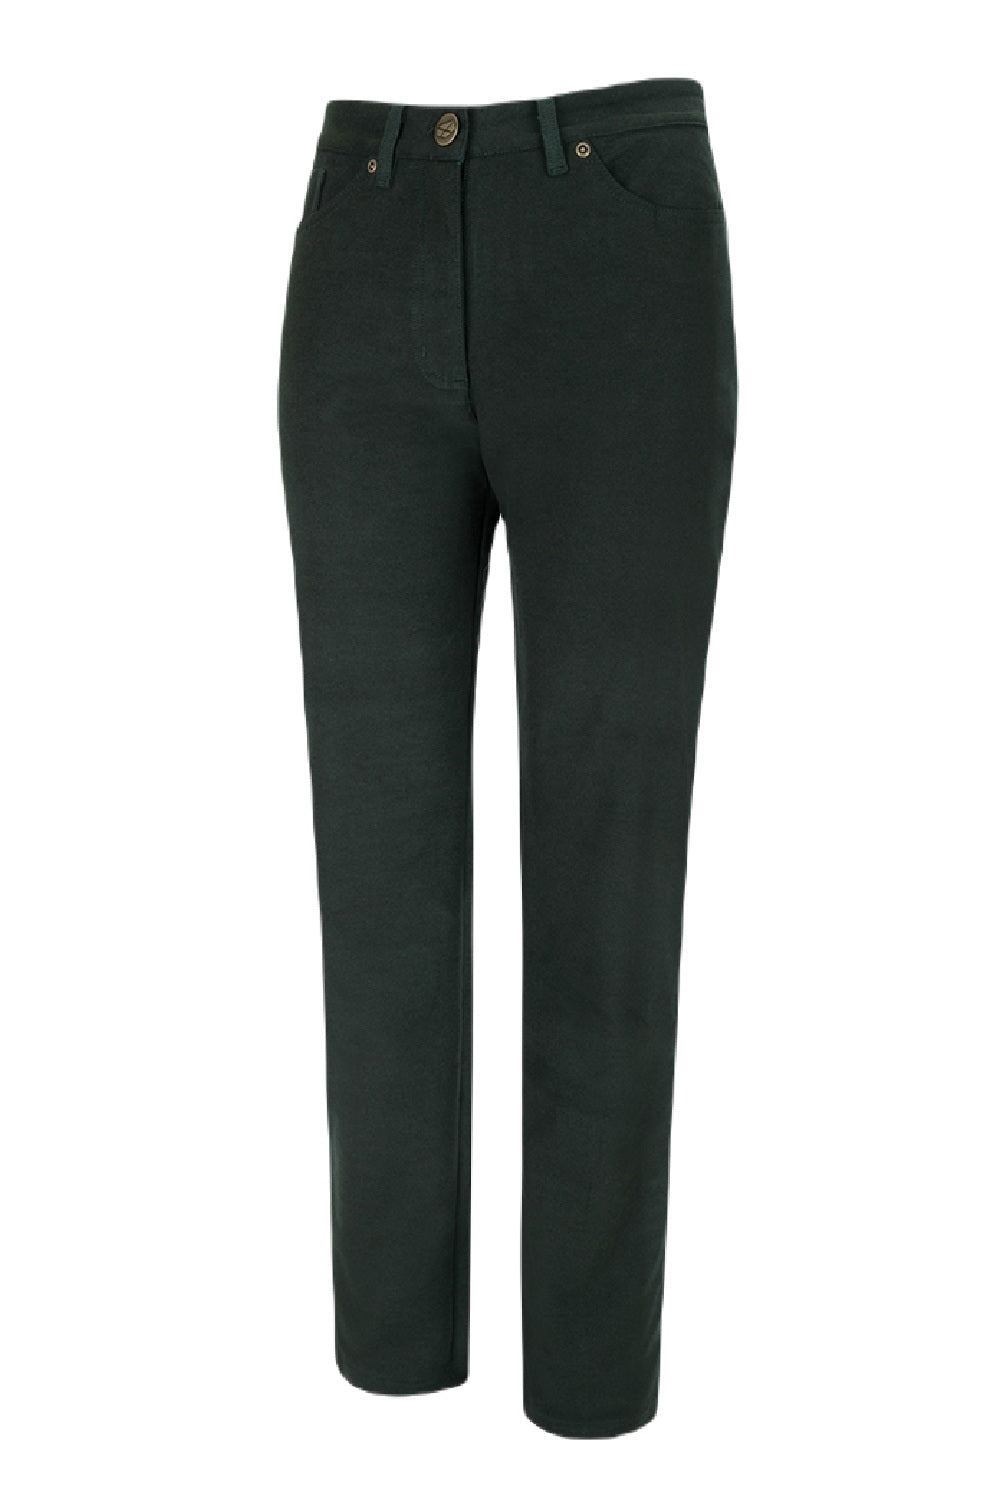 Hoggs of Fife Catrine Ladies Technical Stretch Moleskin Jeans in Forest Green 